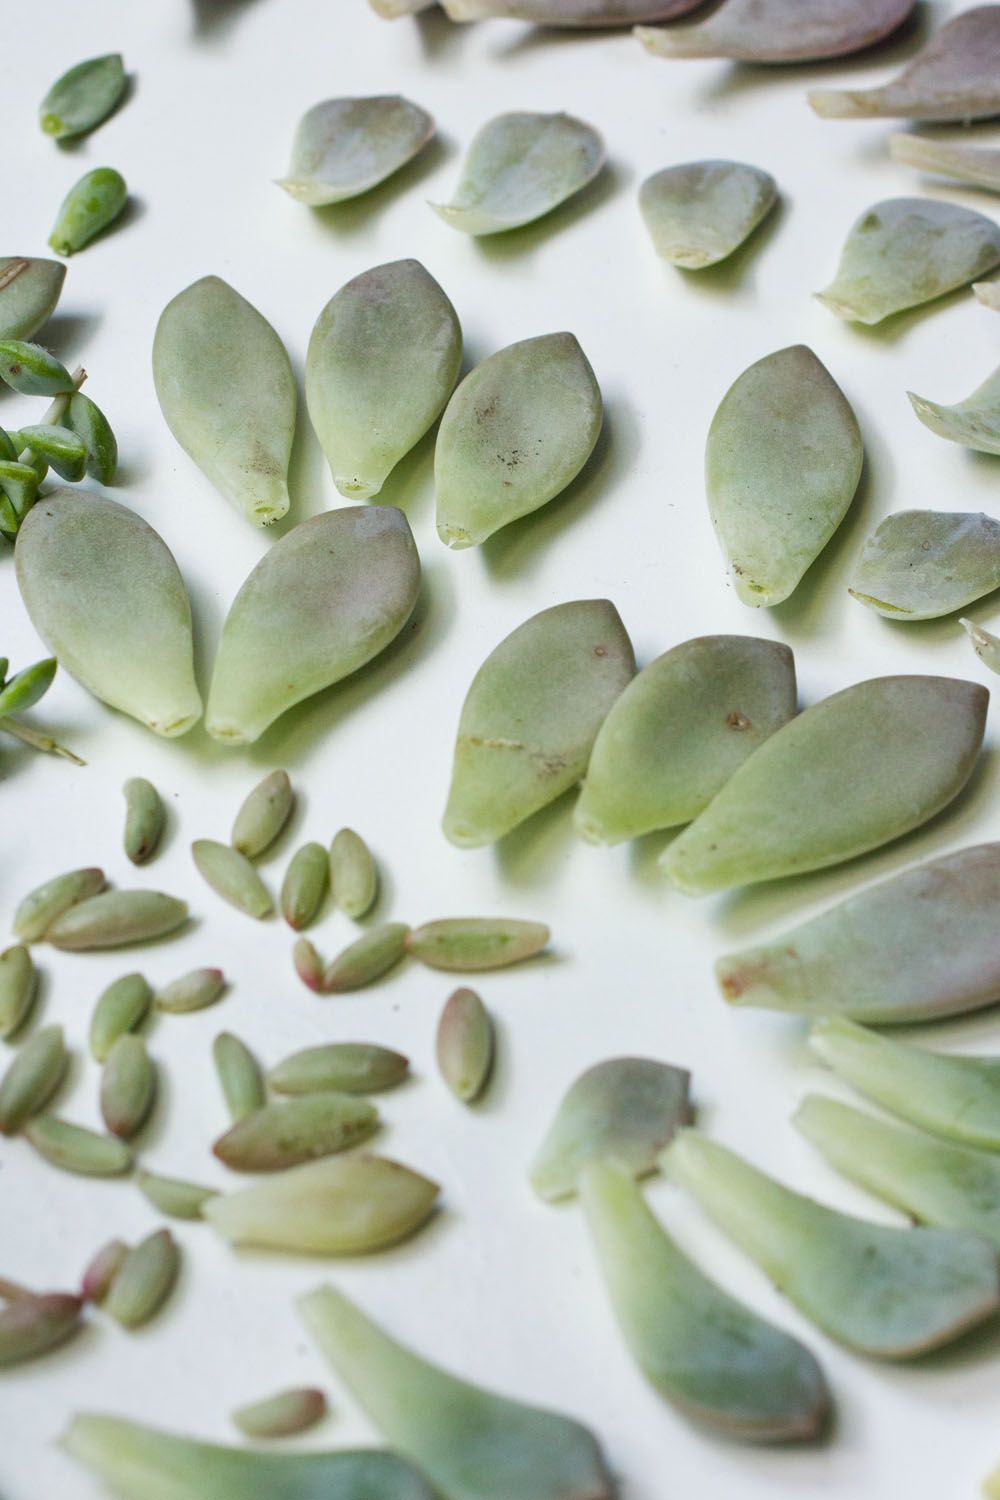 Propagating Succulents from Leaves